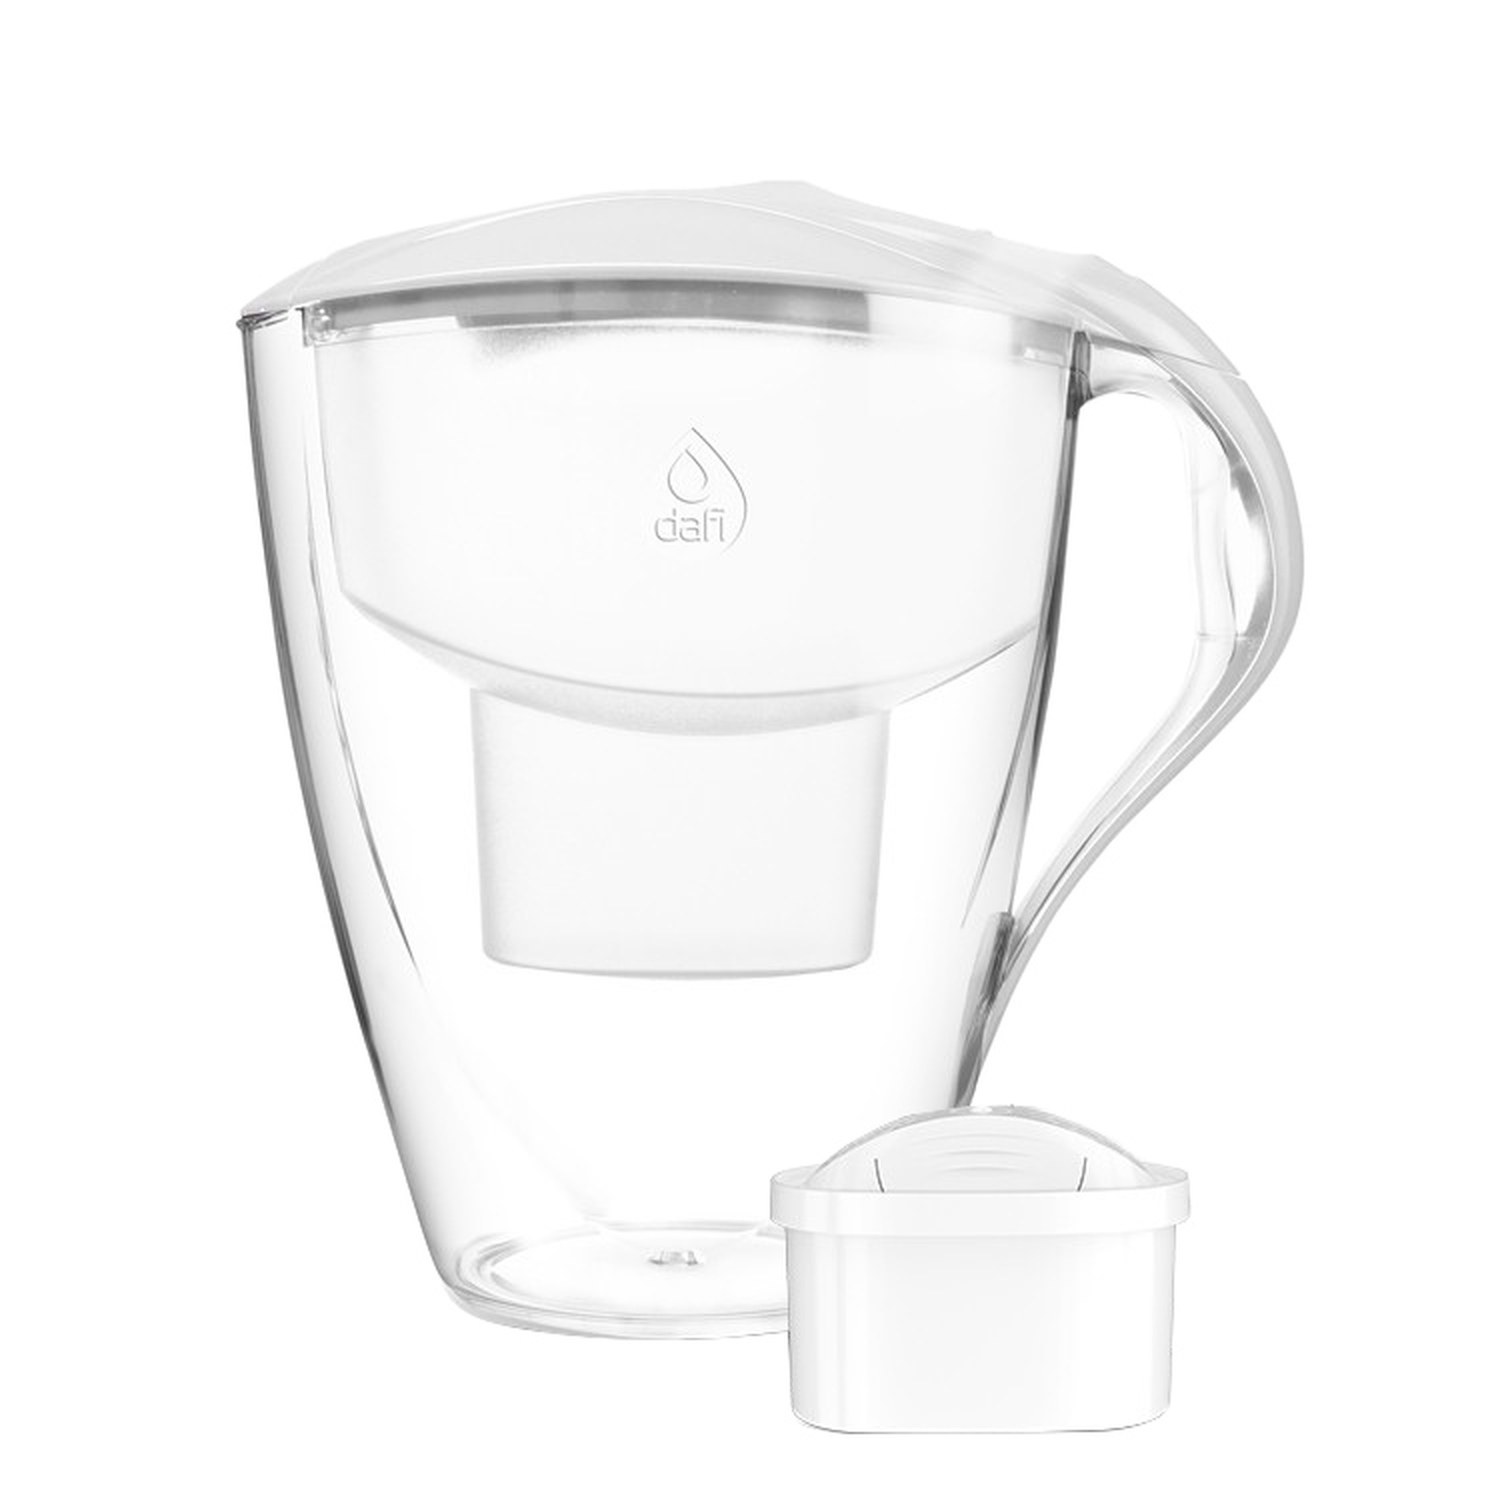 Dafi - Omega 4l LED Water Pitcher + 1 Unimax Filters - White